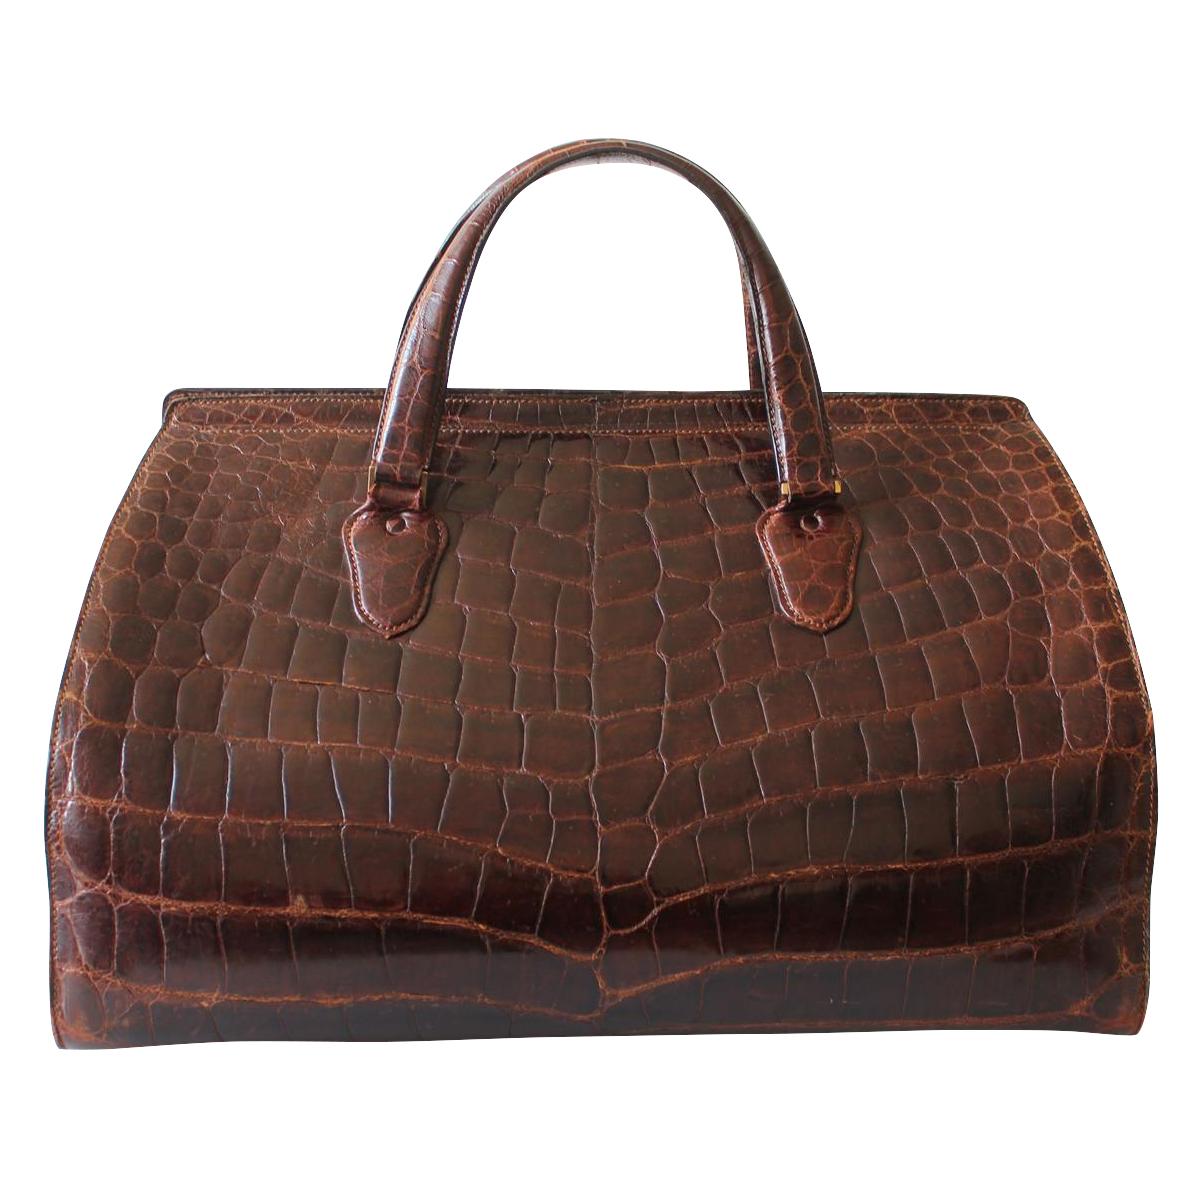 Stunning bag by Valextra Milano
Vintage
50's Period
Real crocodile
Brown color
Two handles
Zip closure
Two internal large zip pockets
Cm 49 x 34 x 25 (19.2 x 13.38 x 9.8 inches)
Good conditions considering the age
Worldwide express shipping included